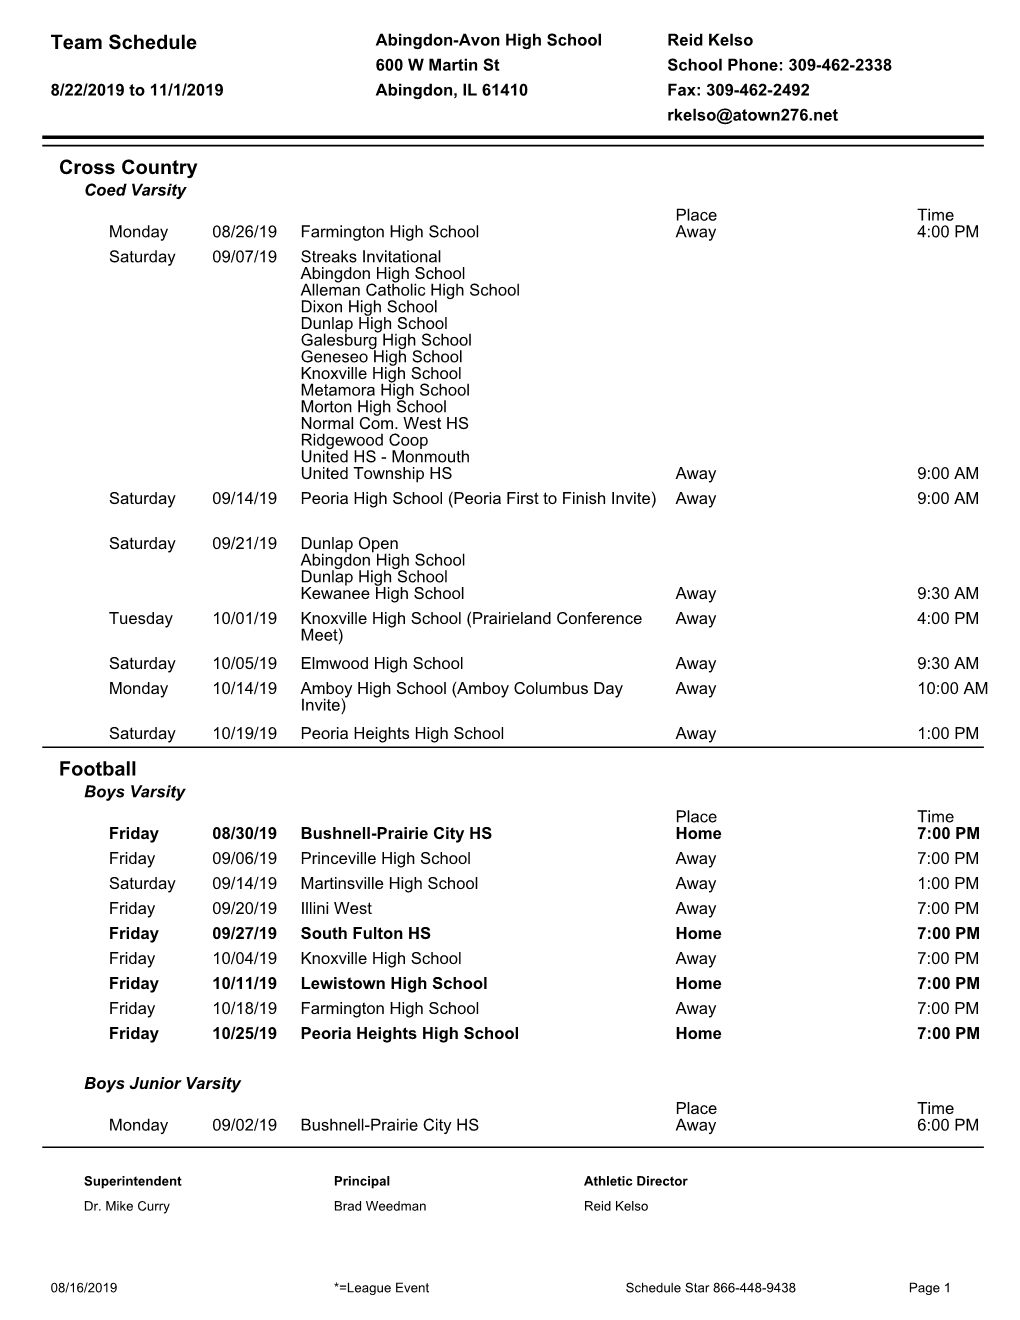 Team Schedule Cross Country Football